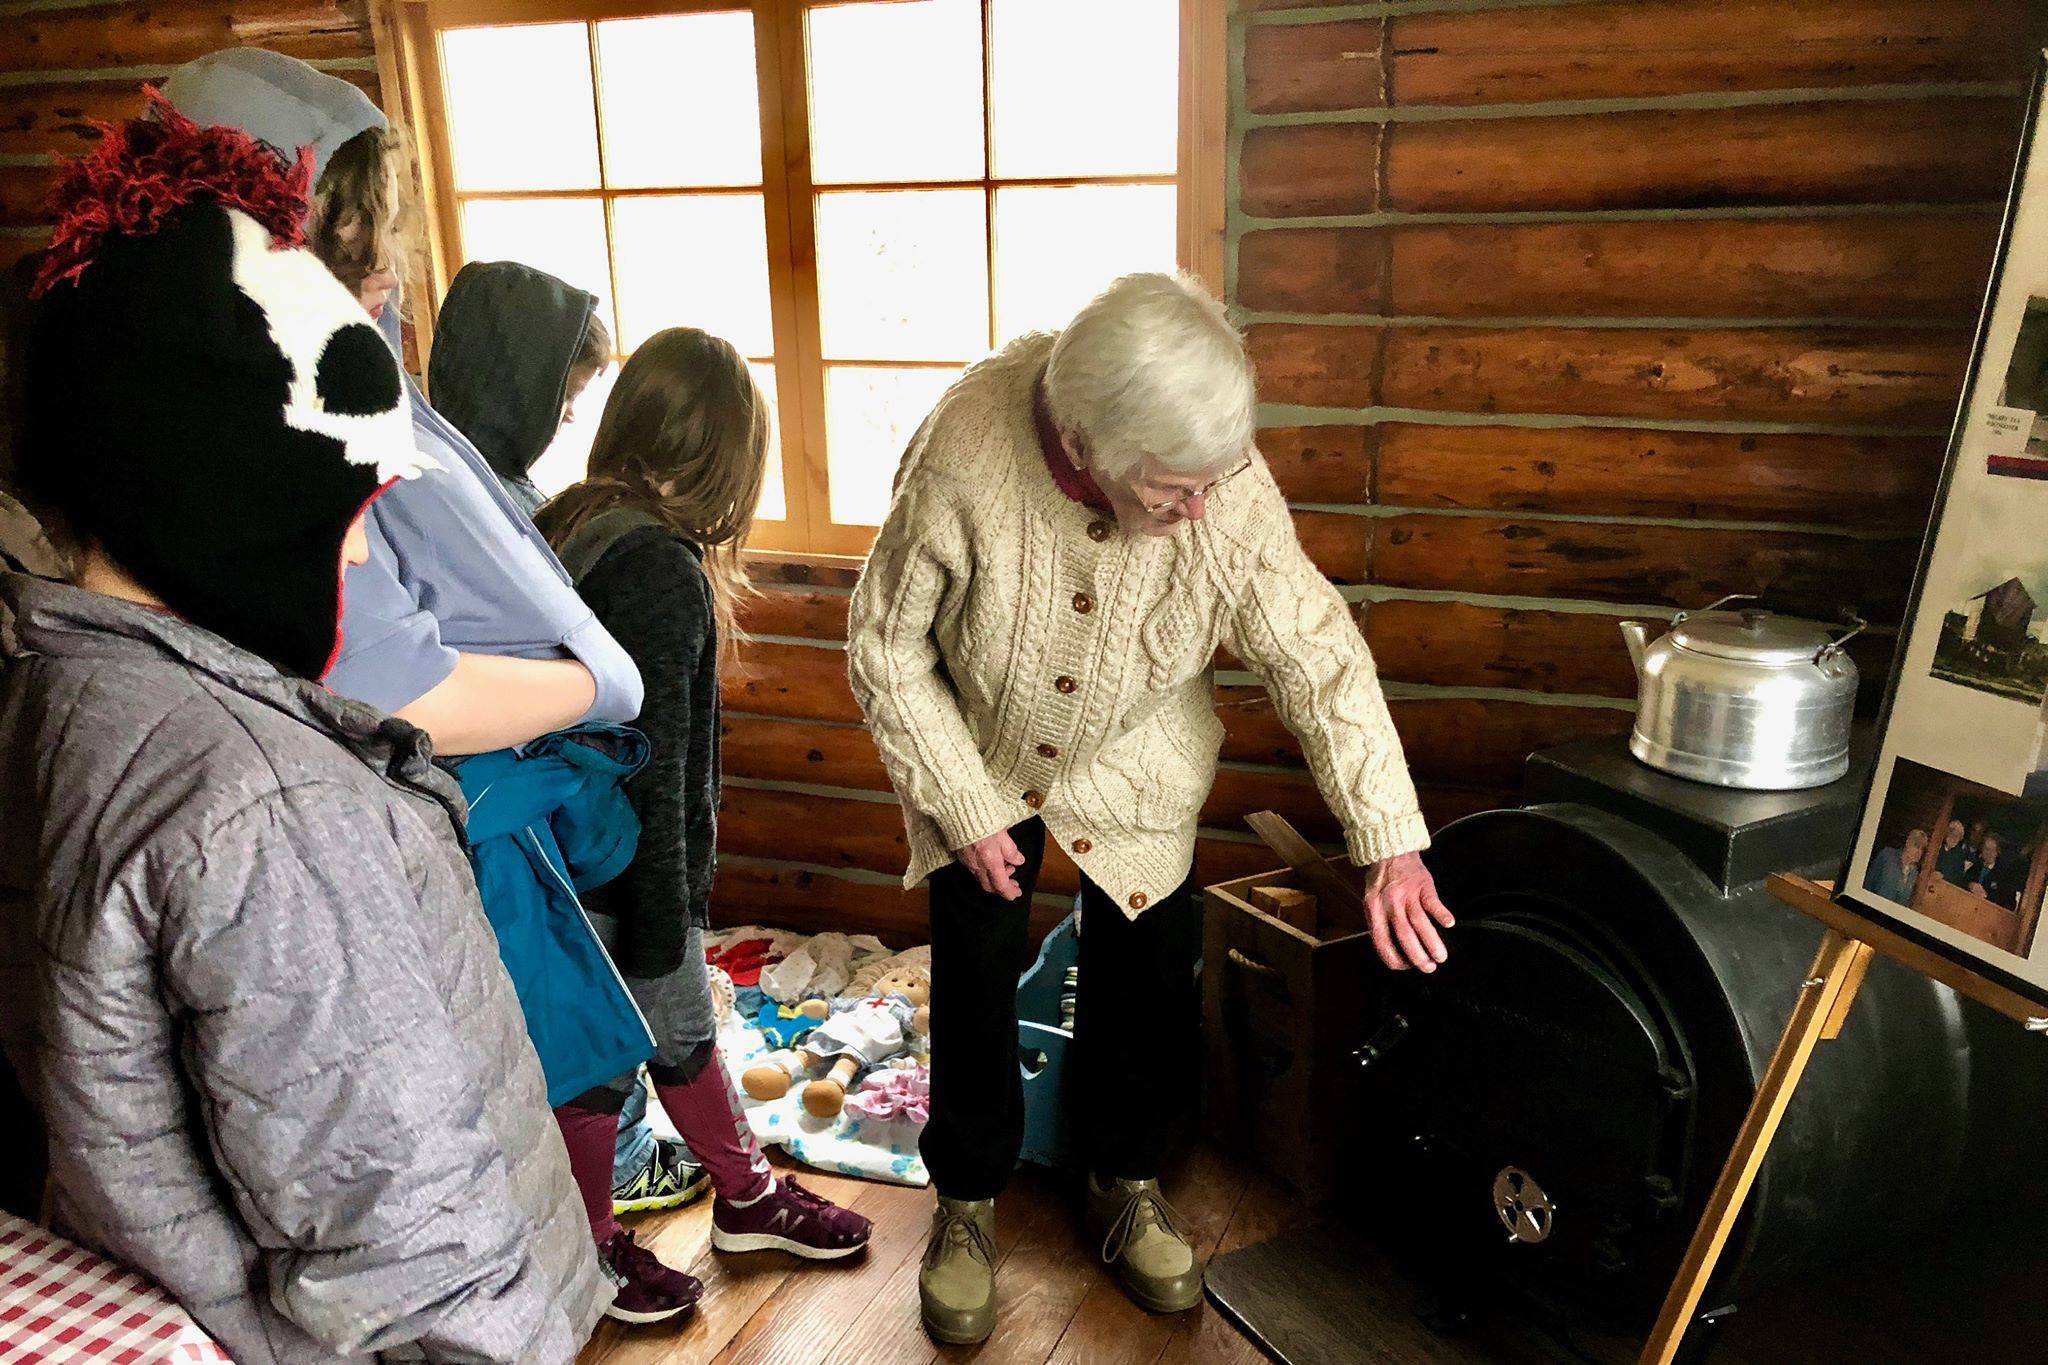 Marge Mullen shows a third-grade class how the residents of the Howard Lee Homestead heated their home, on Wednesday, Oct. 17, 2018, in Soldotna, AK. (Photo by Victoria Petersen/Peninsula Clarion)